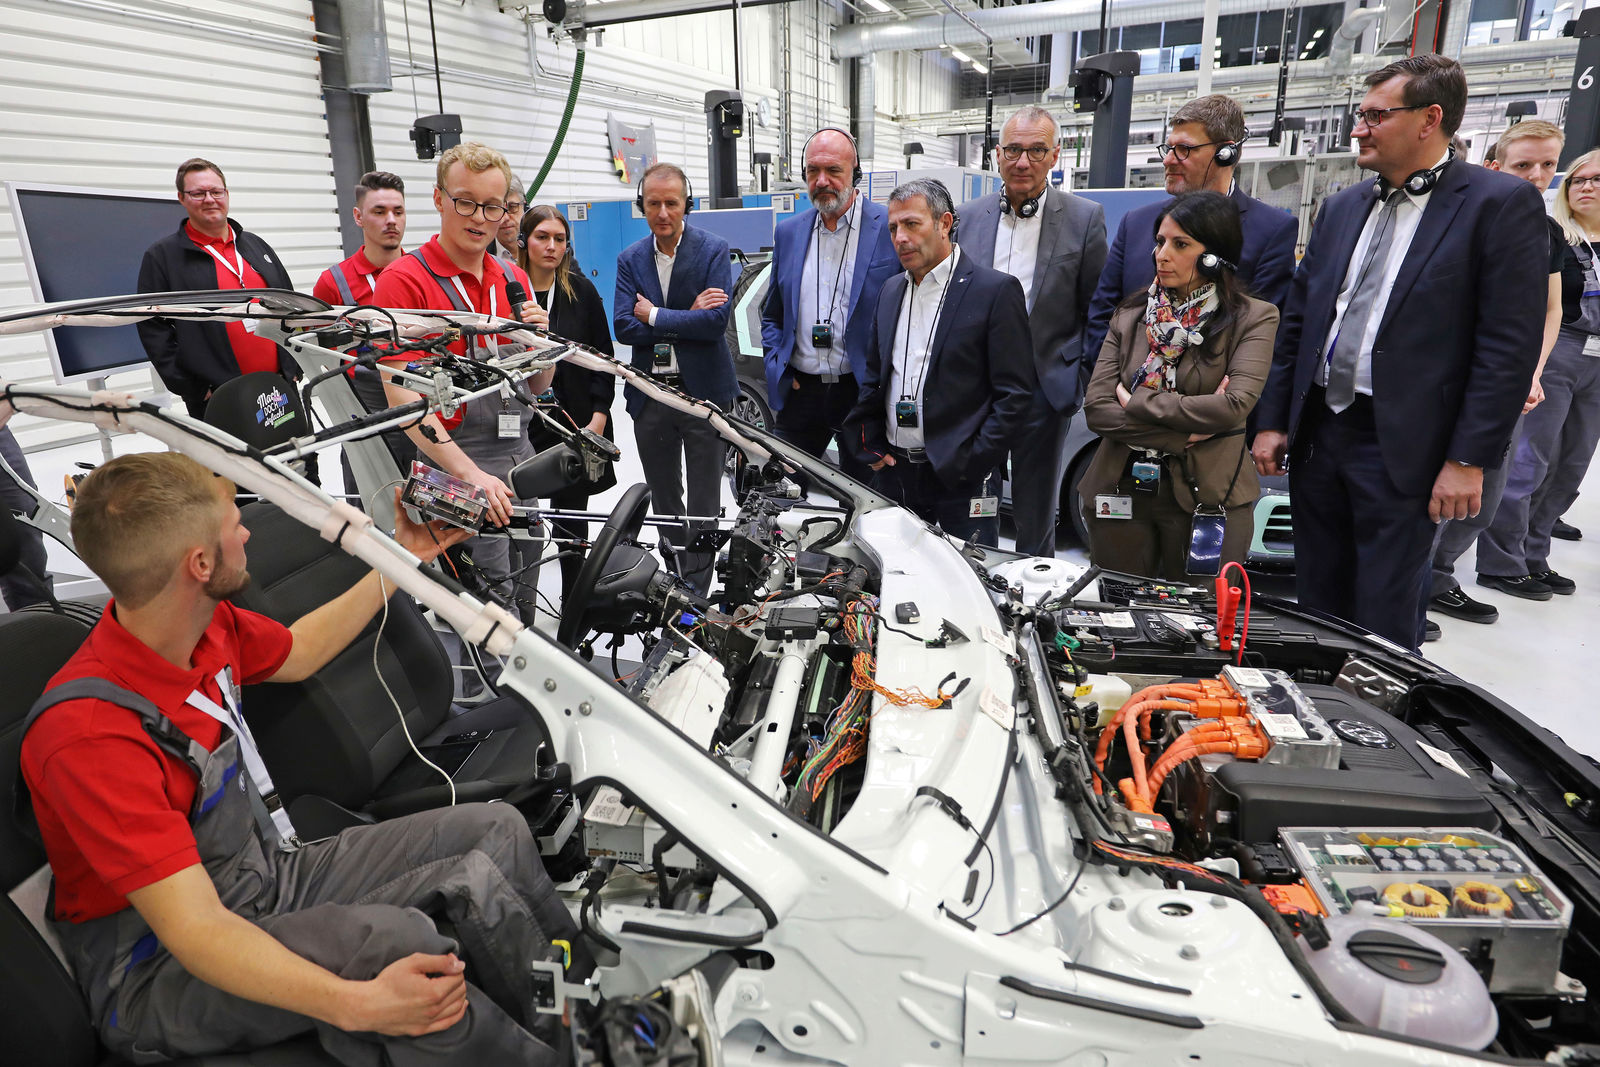 New teaching, new learning — Volkswagen makes vocational training fit for transformation and future